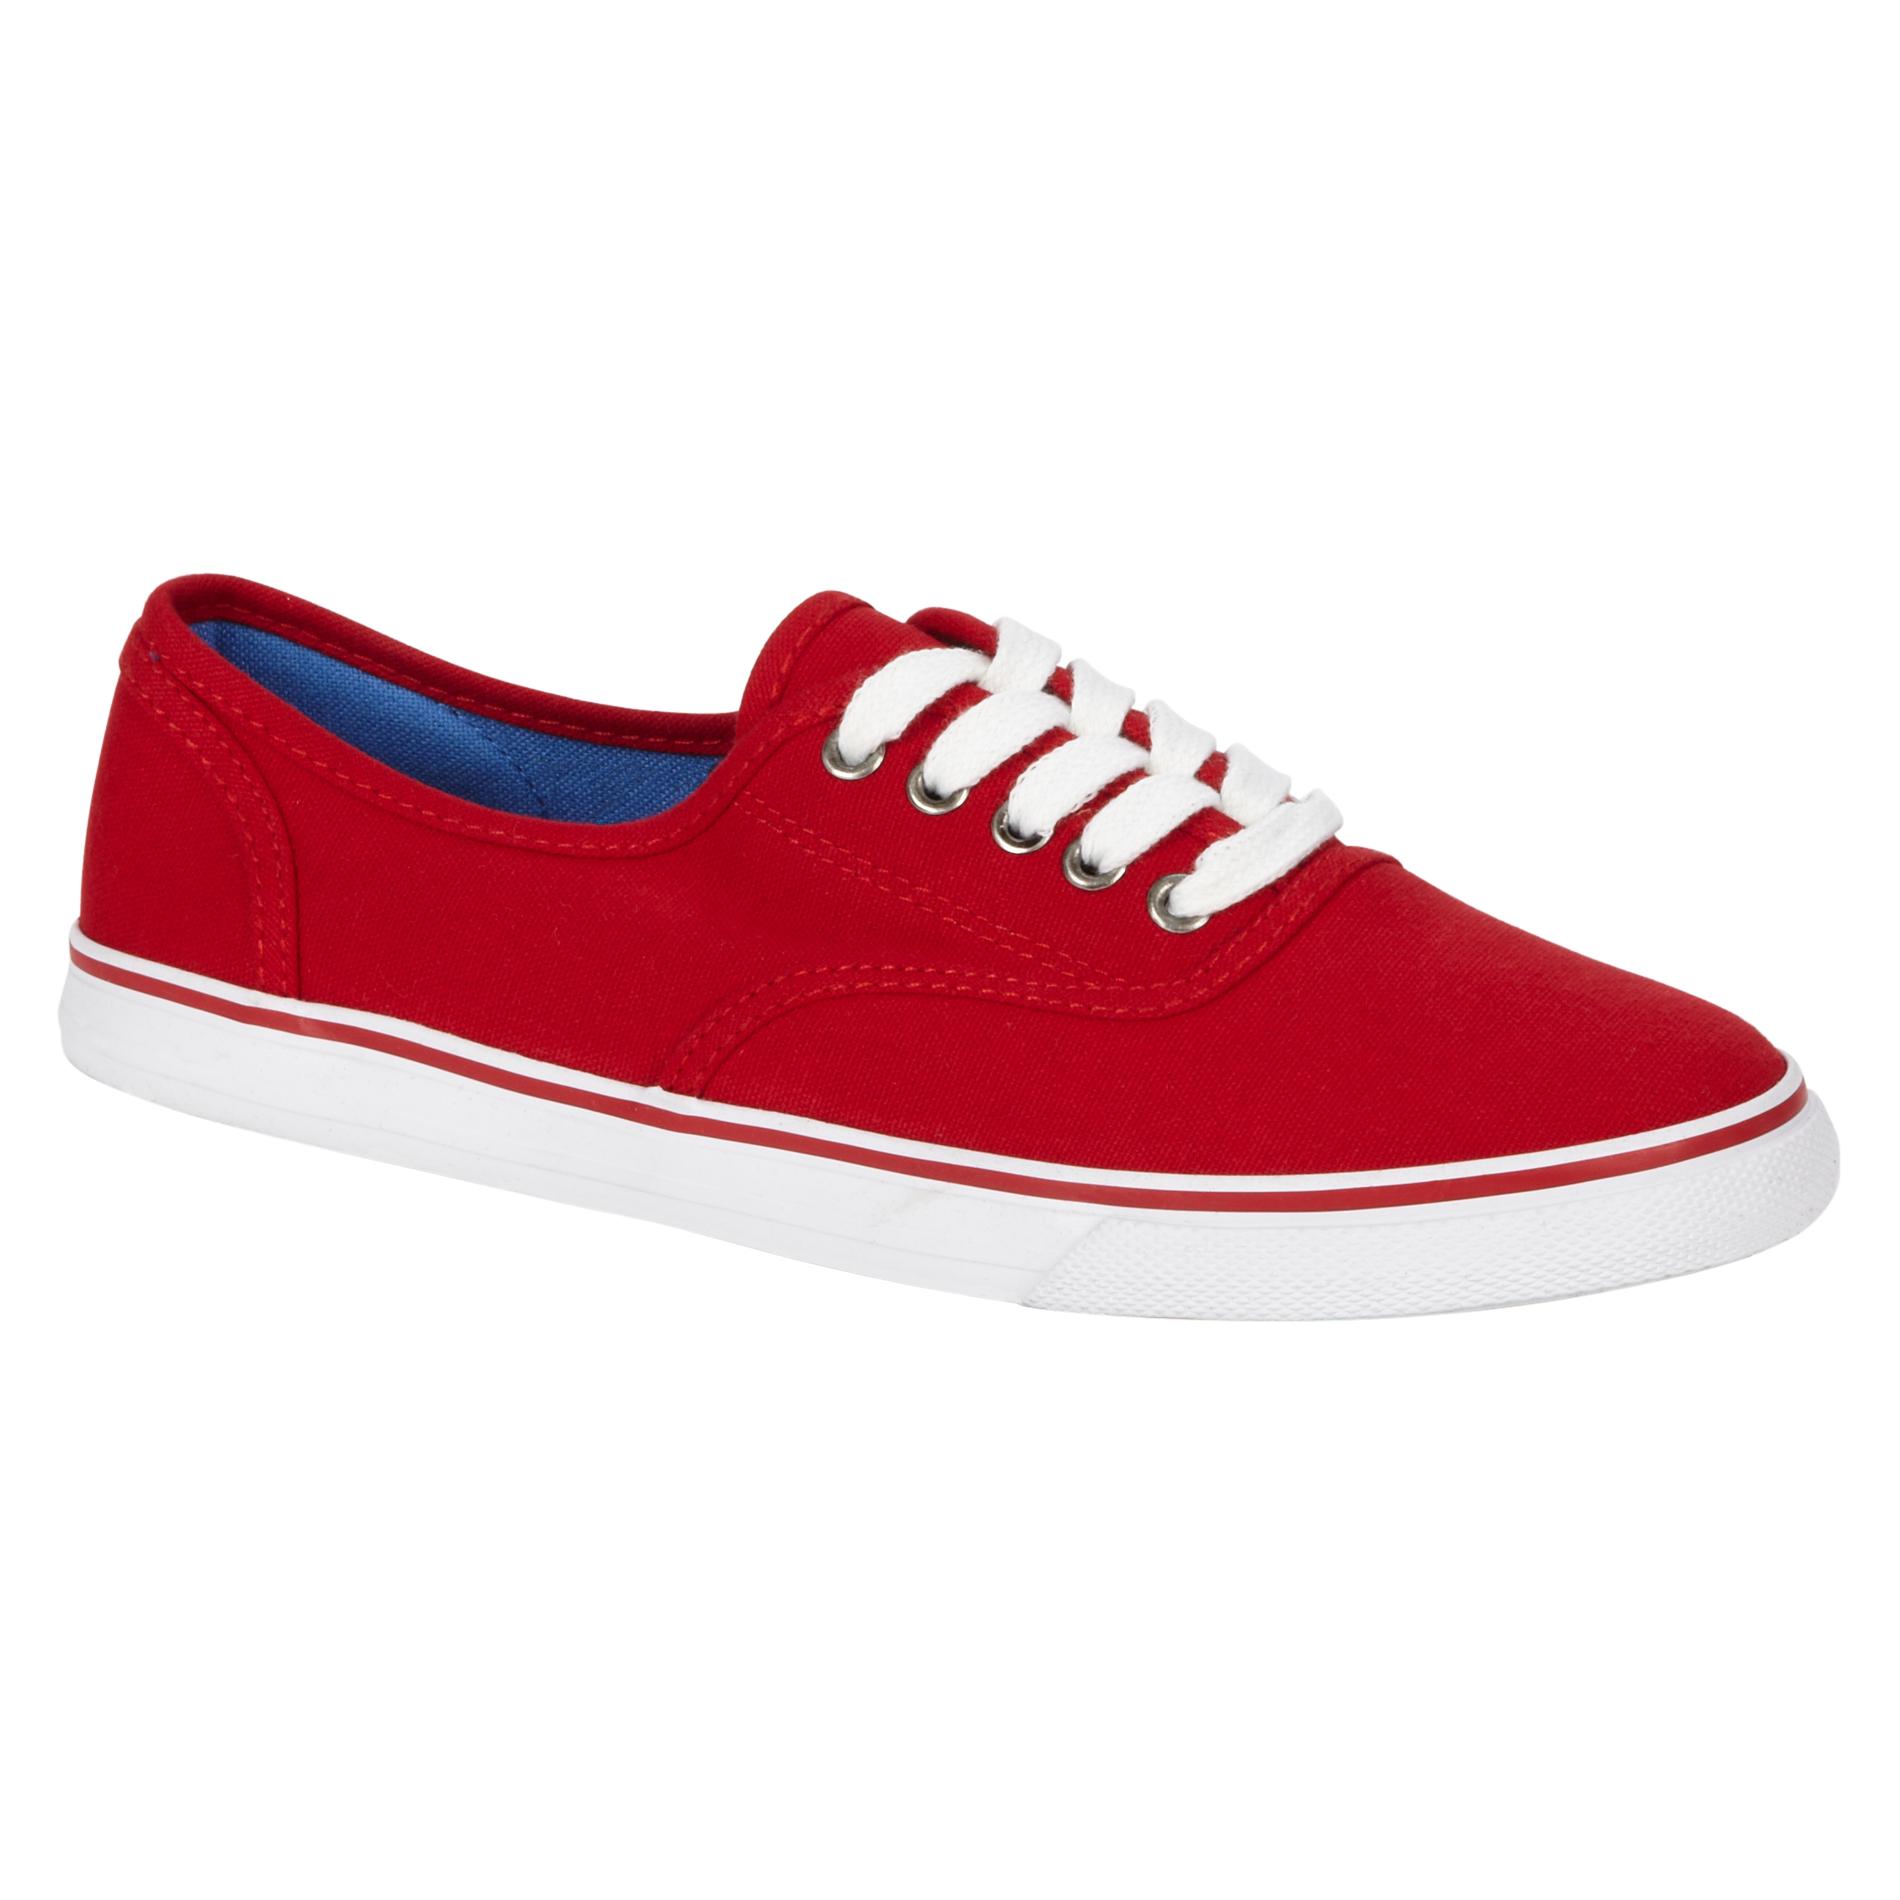 Bongo Women's Seattle Casual Canvas - Red